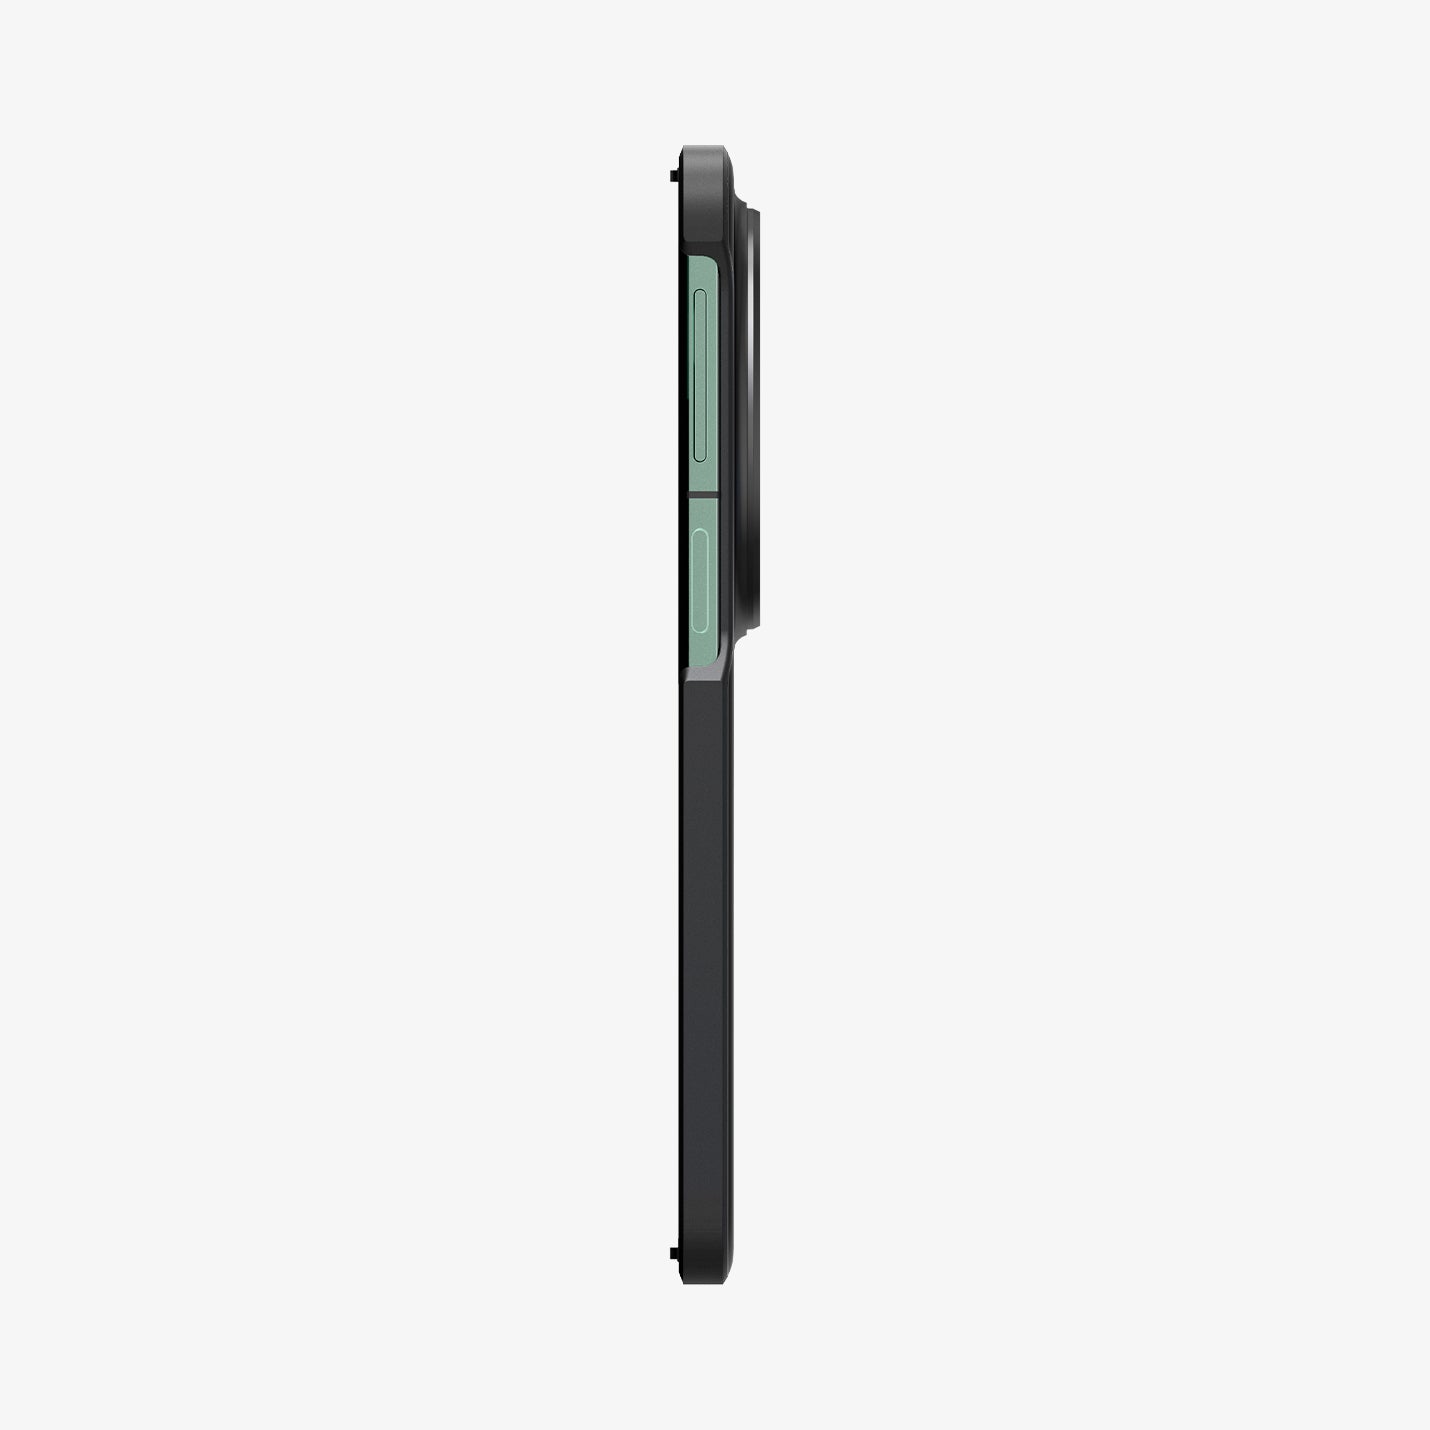 ACS07373 - OnePlus Open Series Case Thin Fit in black showing the side